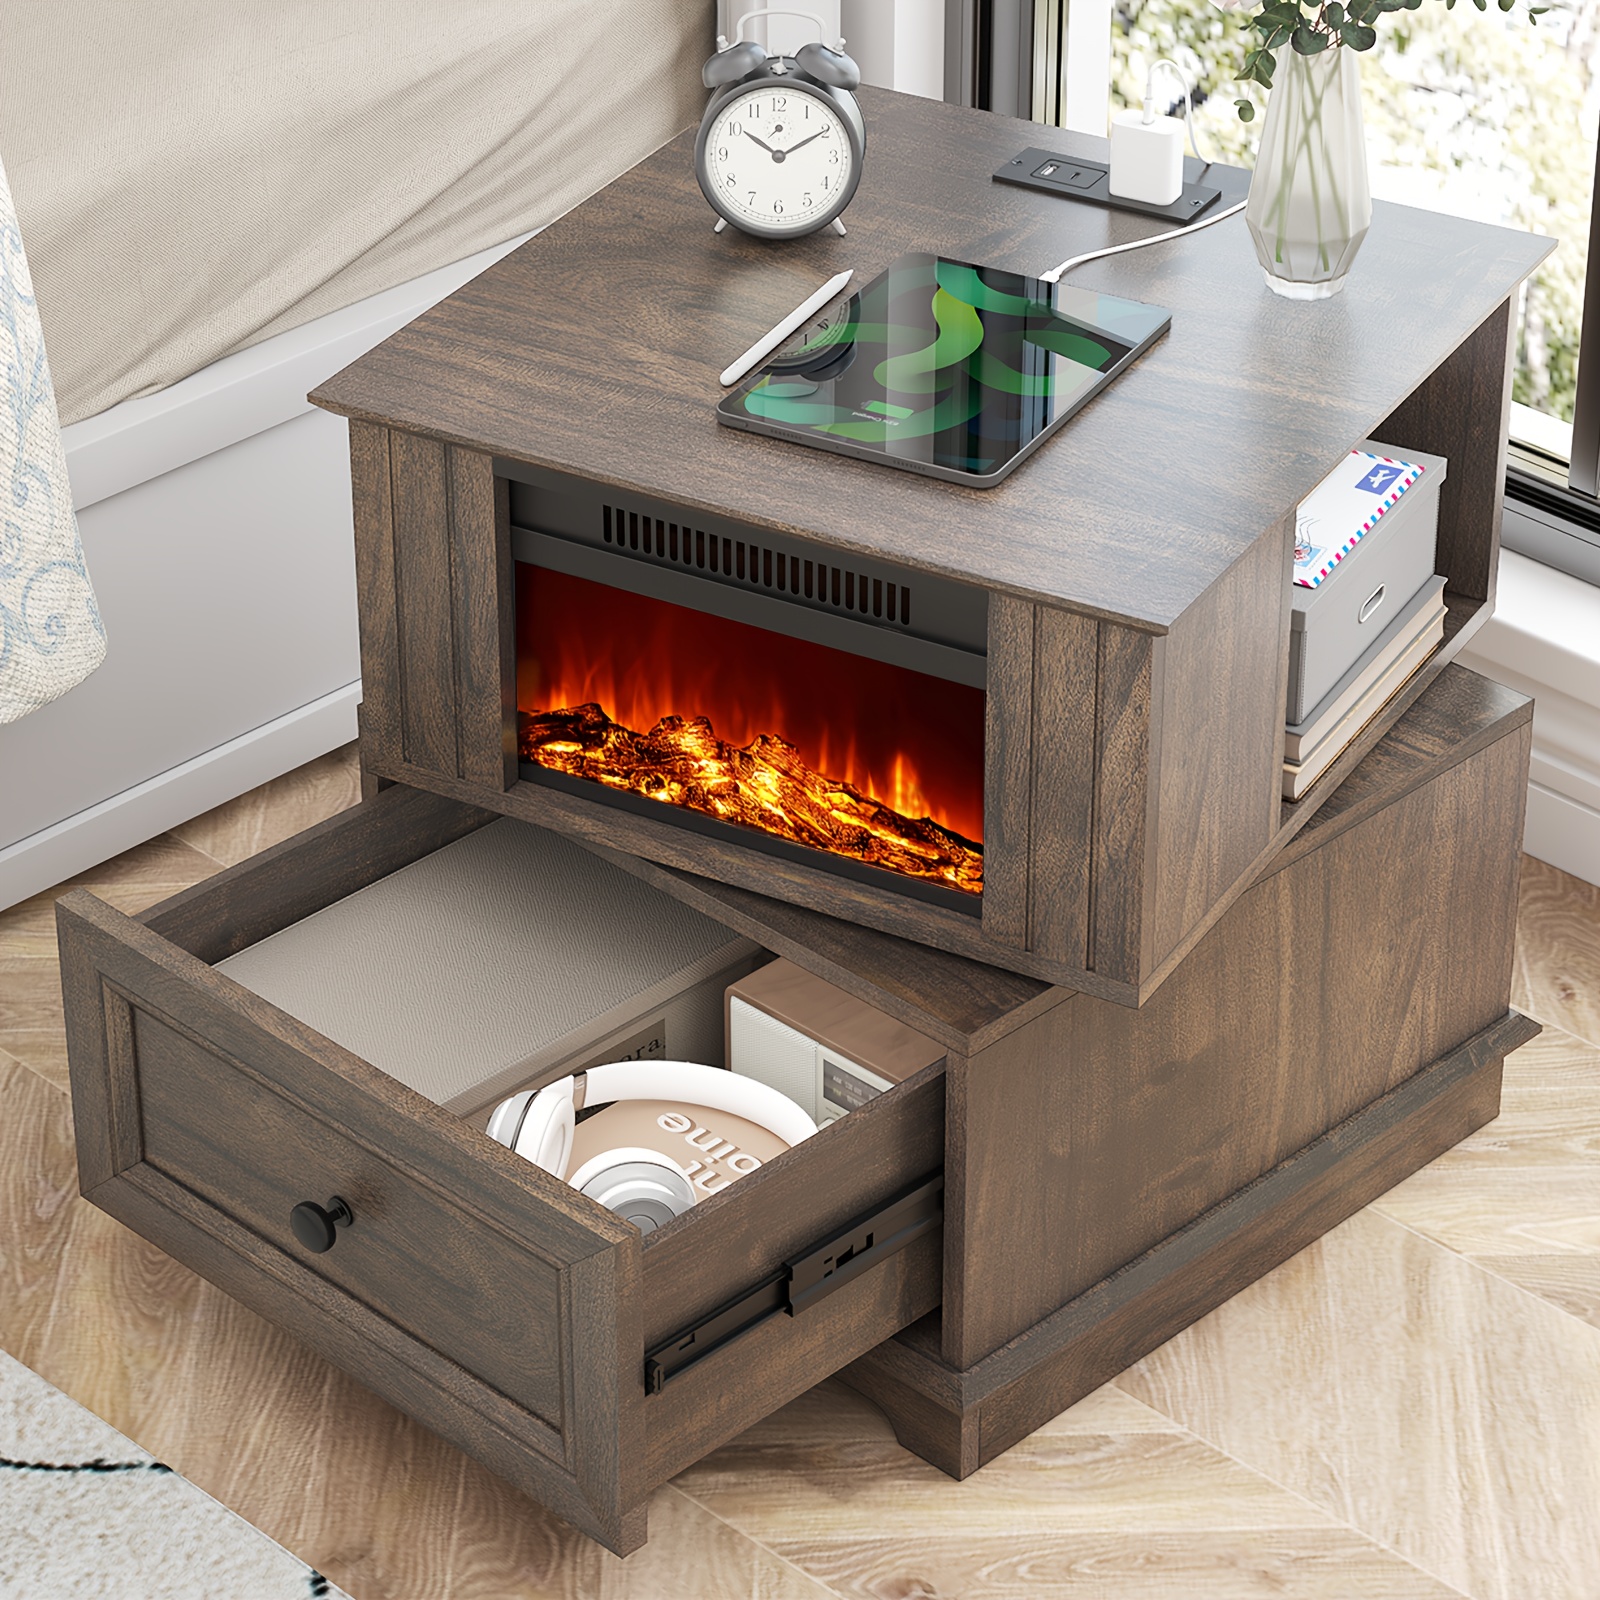 

Rotating End Table With 13" Electric , Side Table With Fast Charging Station, 1400w Fireplace End Table With Storage, Wooden Side Table For Living Room, Bedroom, Office